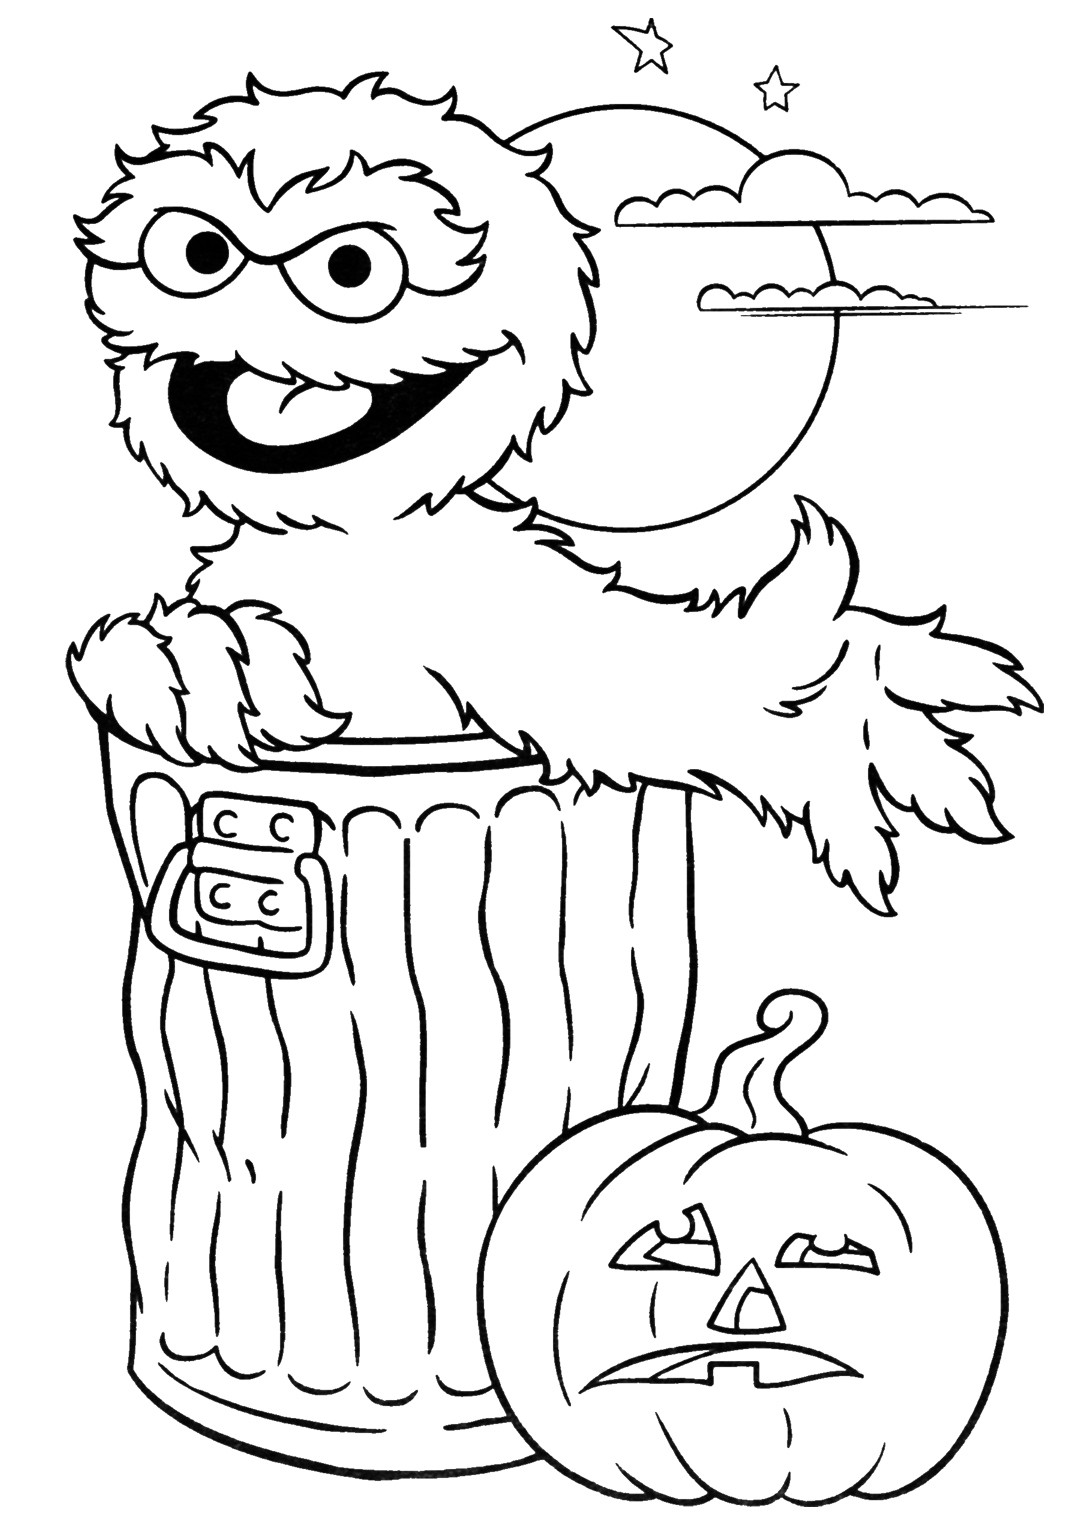 Printable Coloring Pages Halloween
 Halloween Printable Coloring Pages Minnesota Miranda